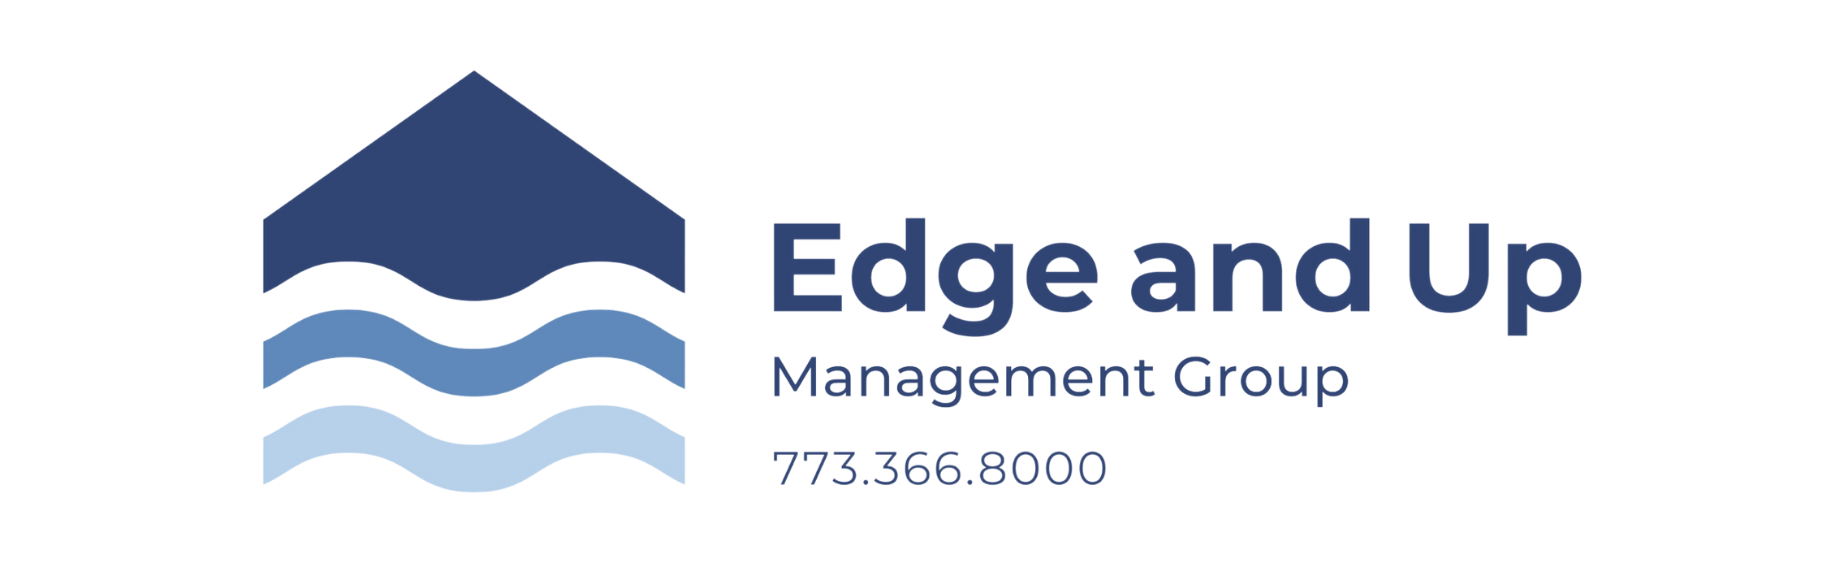 Edge and Up Management Group